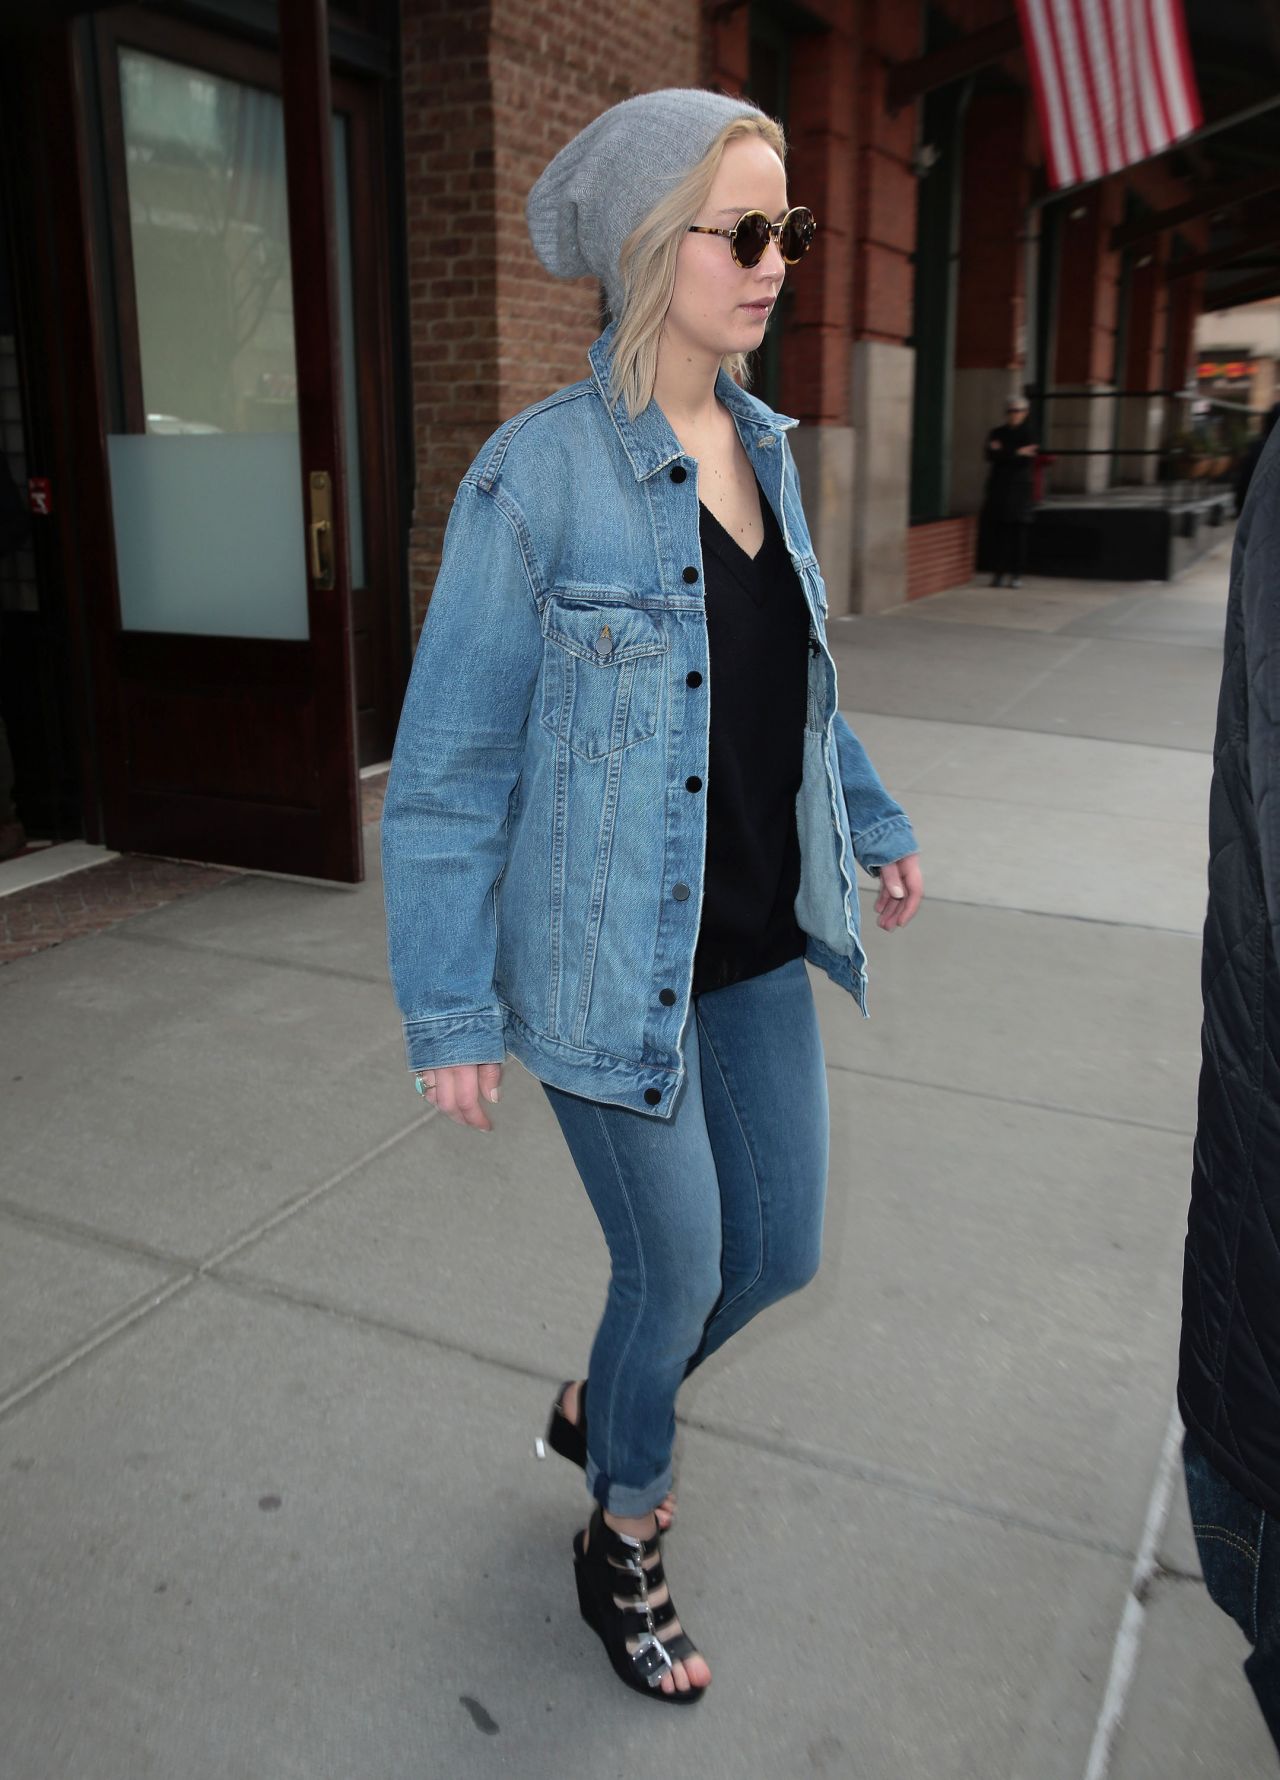 Jennifer Lawrence in Tight Jeans - Out in New York City 2 